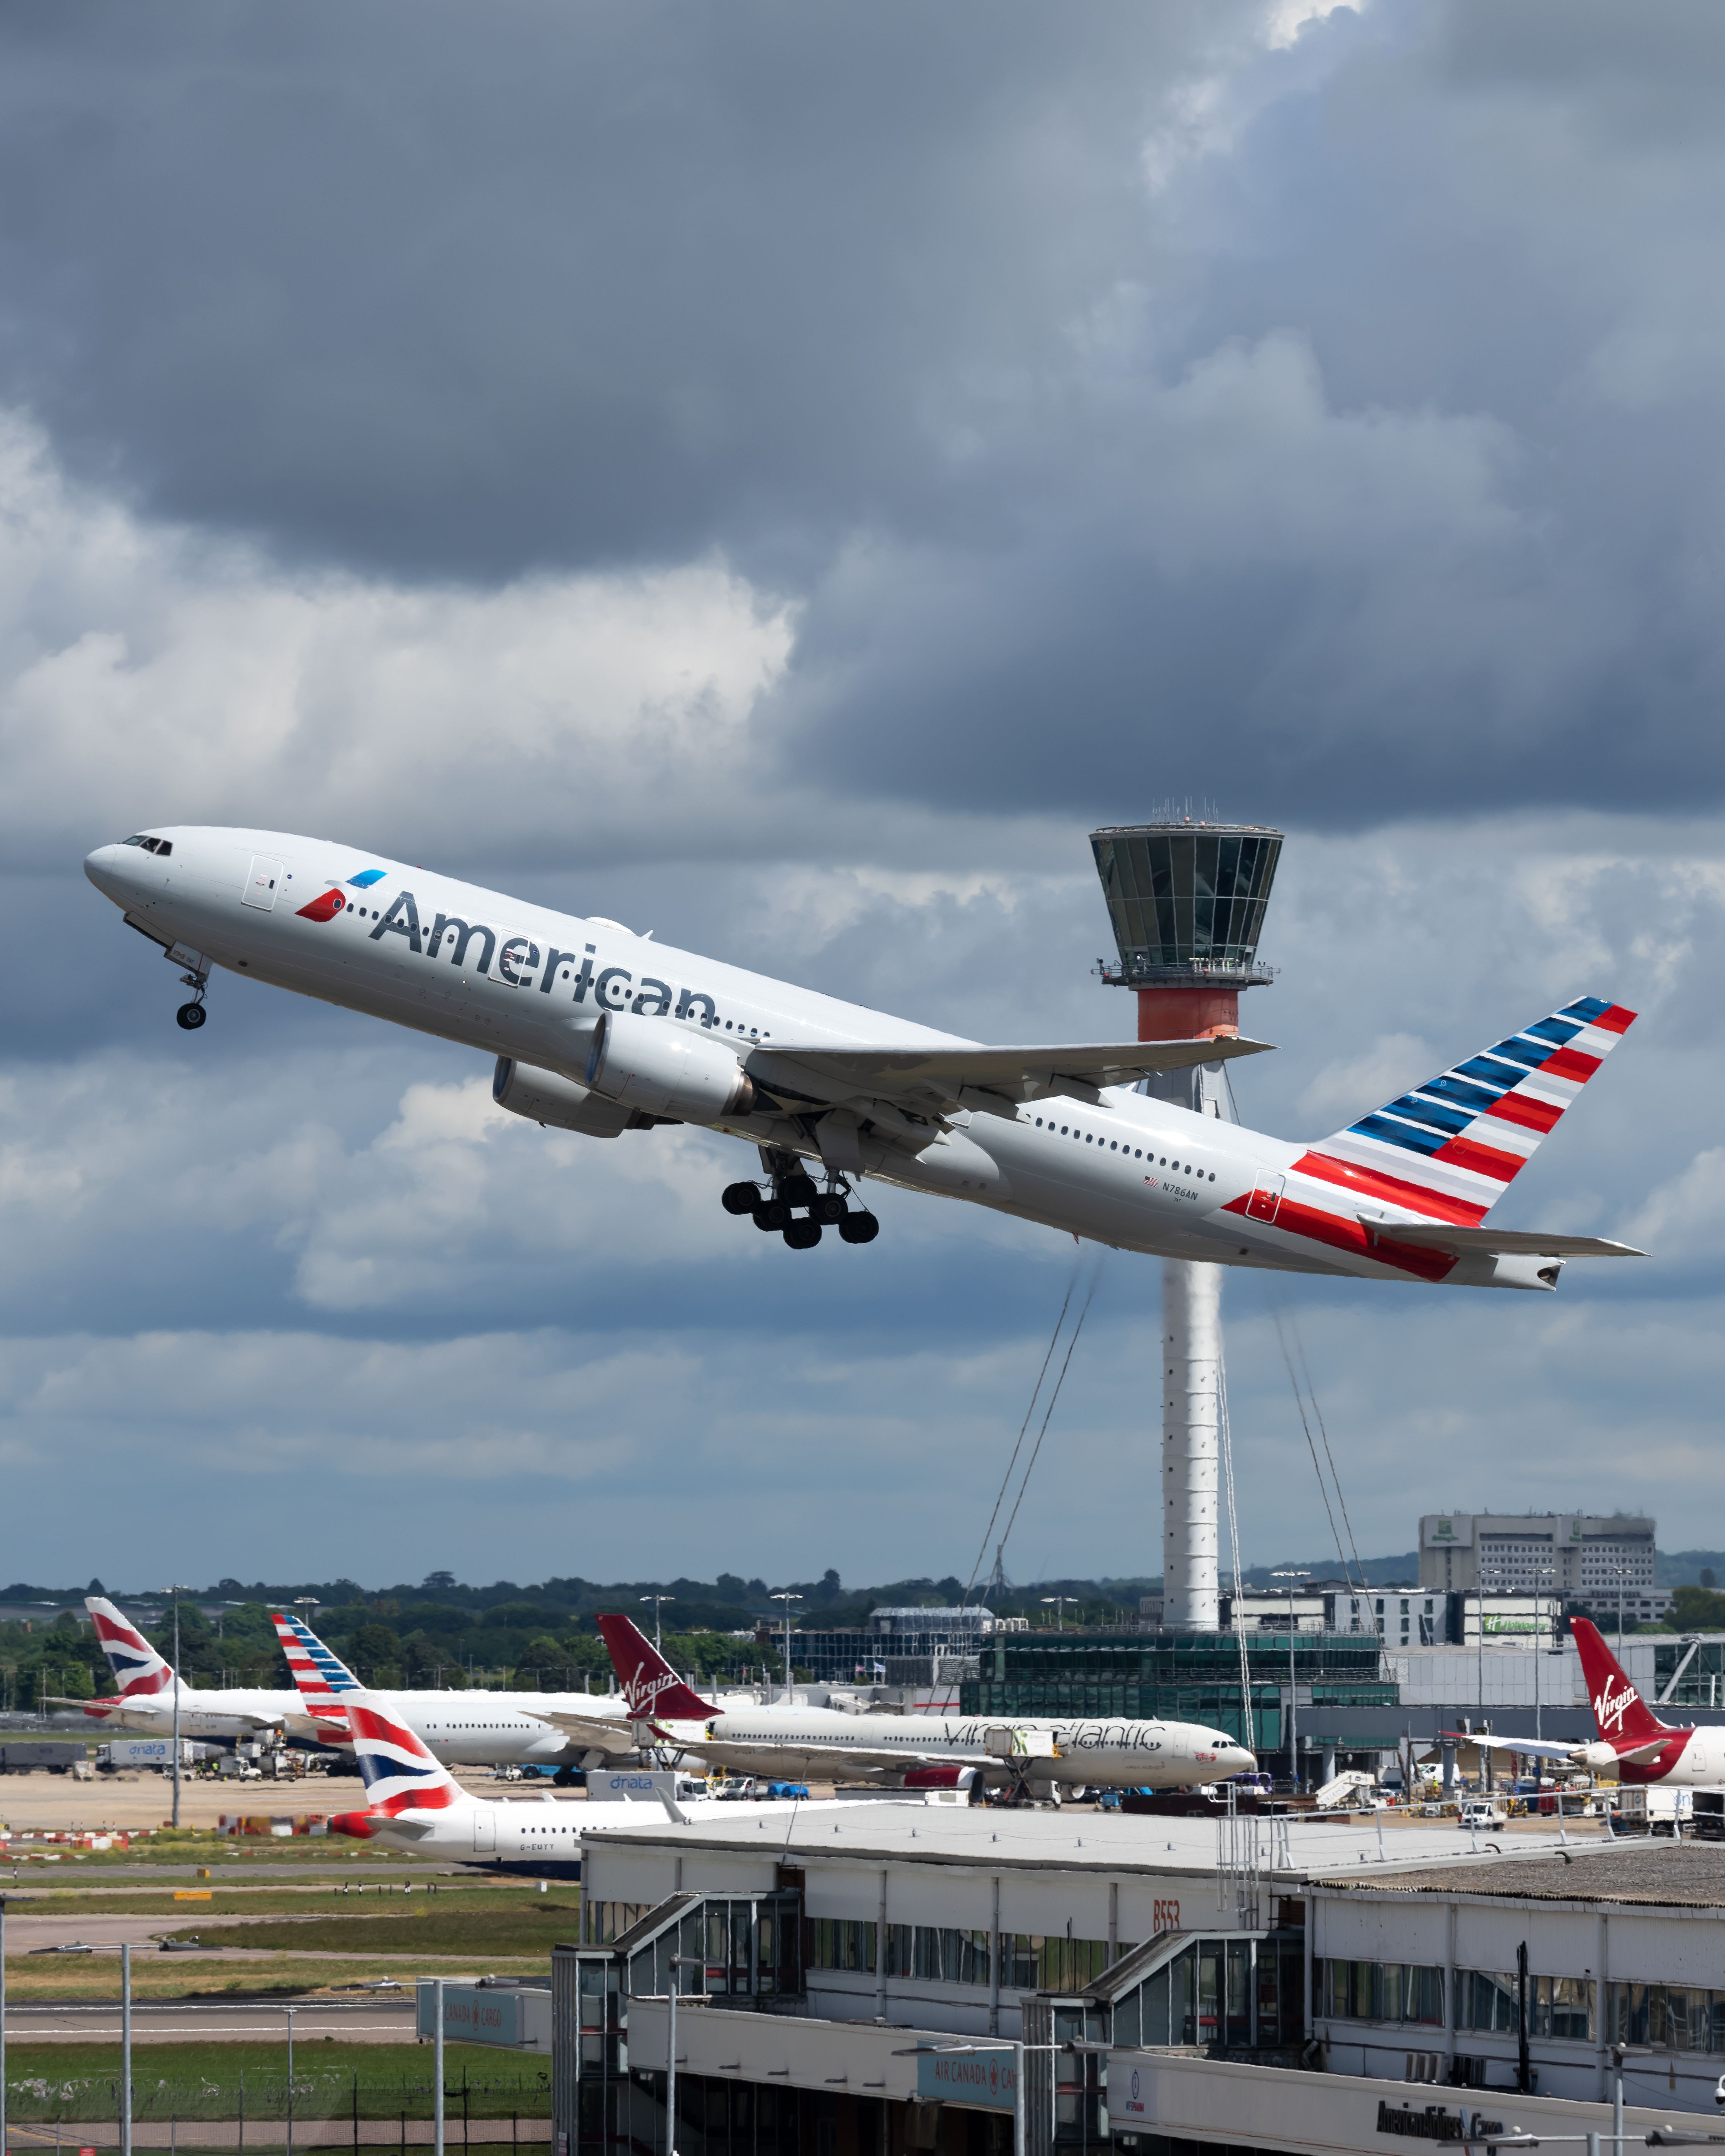 American Airlines To Raise Heathrow Staff Pay 19% Over 3 Years